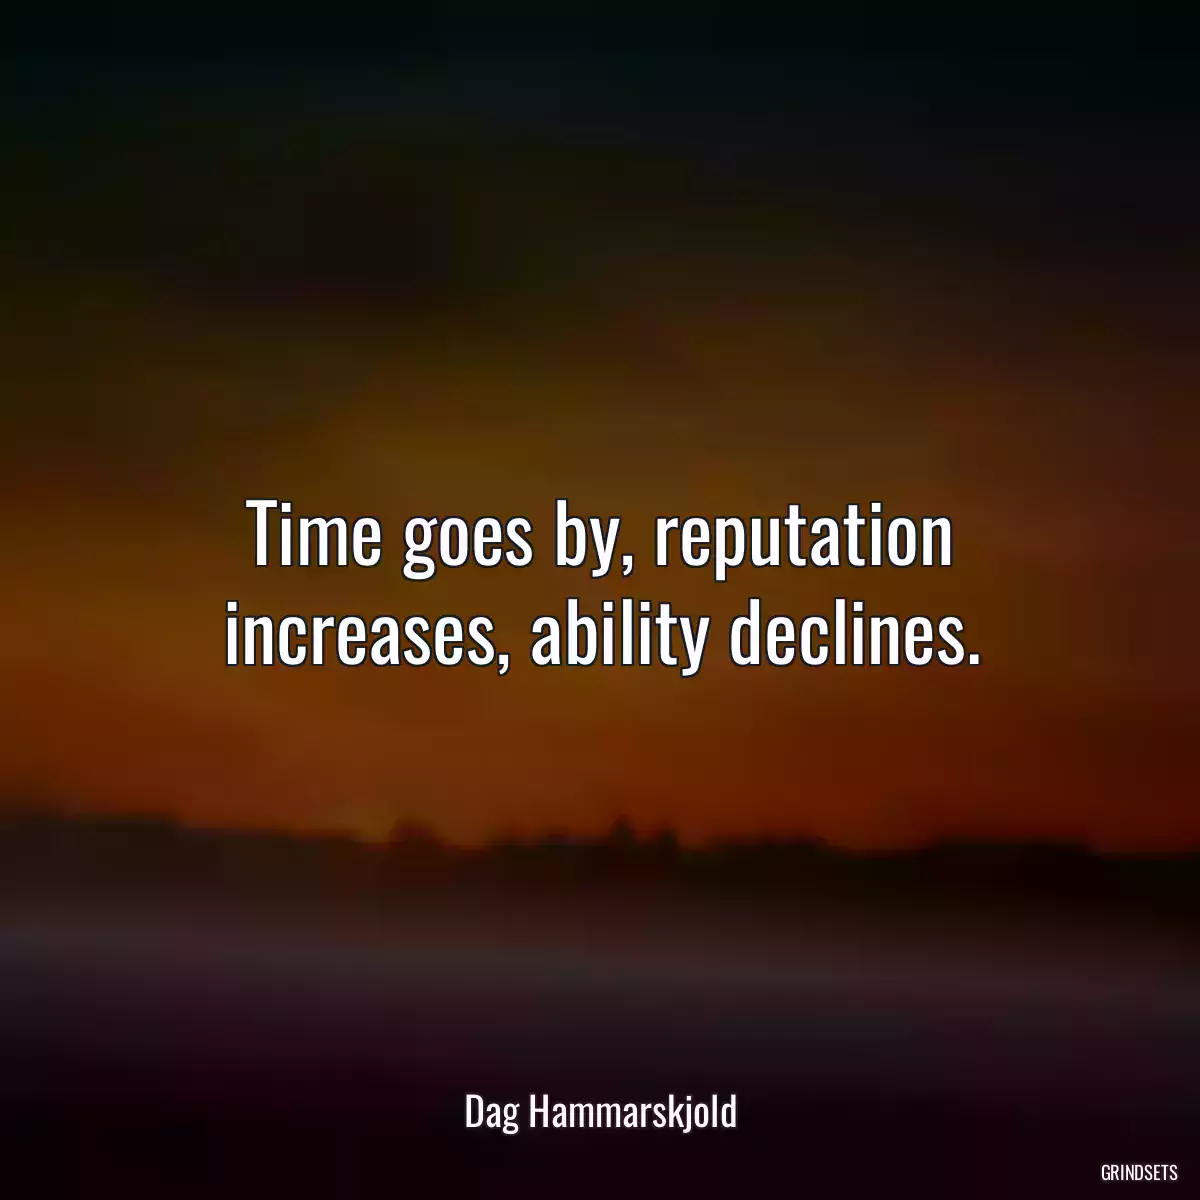 Time goes by, reputation increases, ability declines.